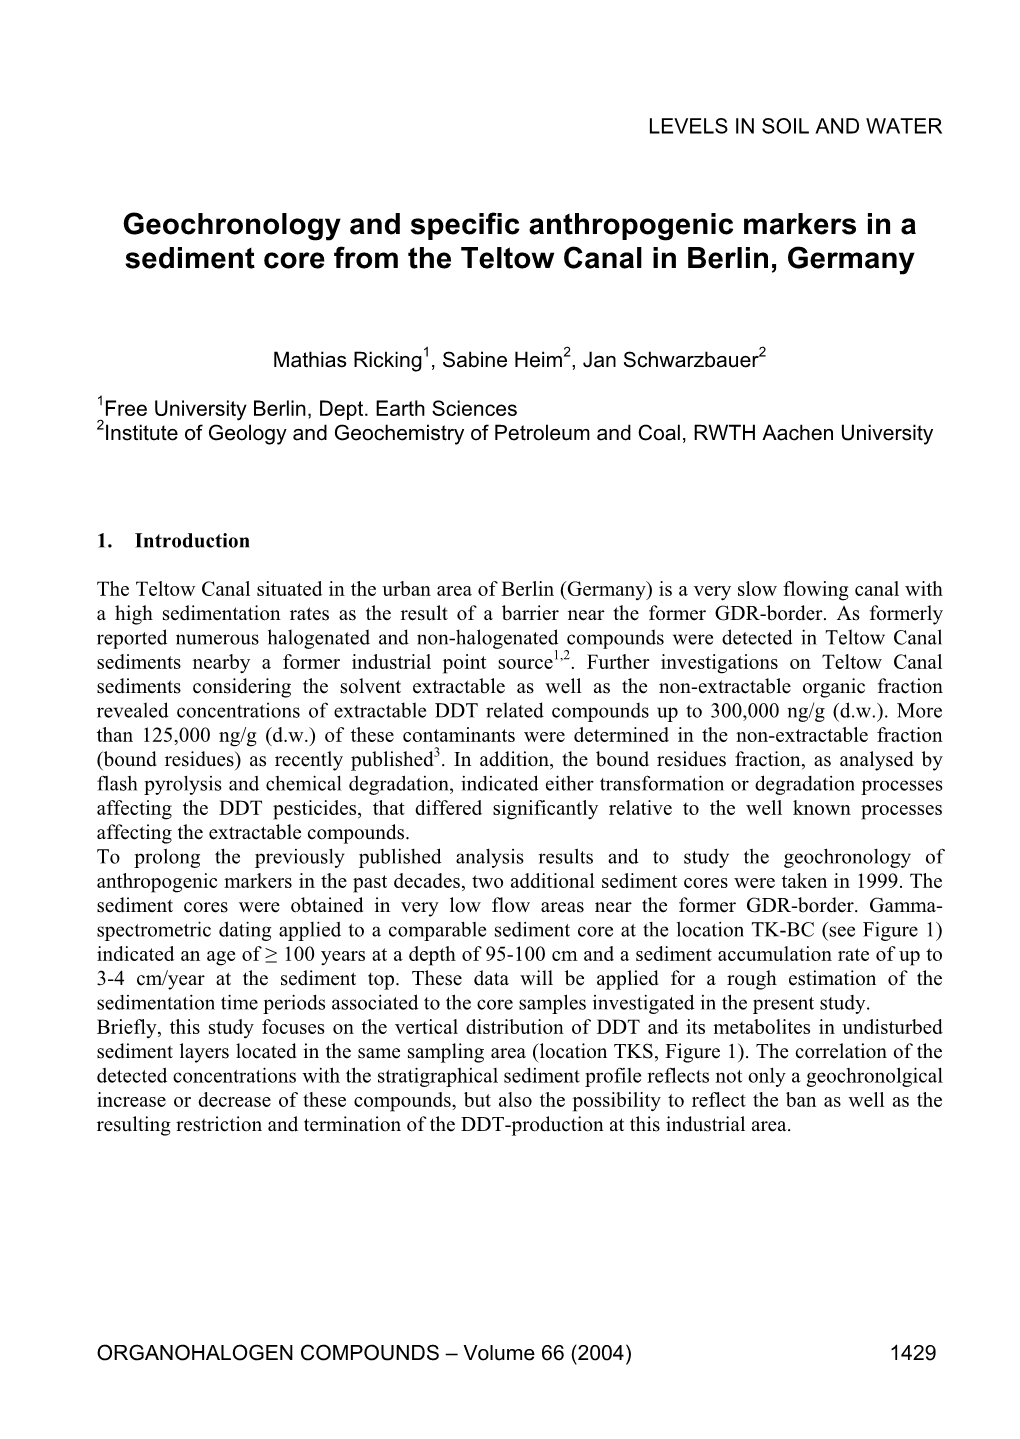 Geochronology and Specific Anthropogenic Markers in a Sediment Core from the Teltow Canal in Berlin, Germany